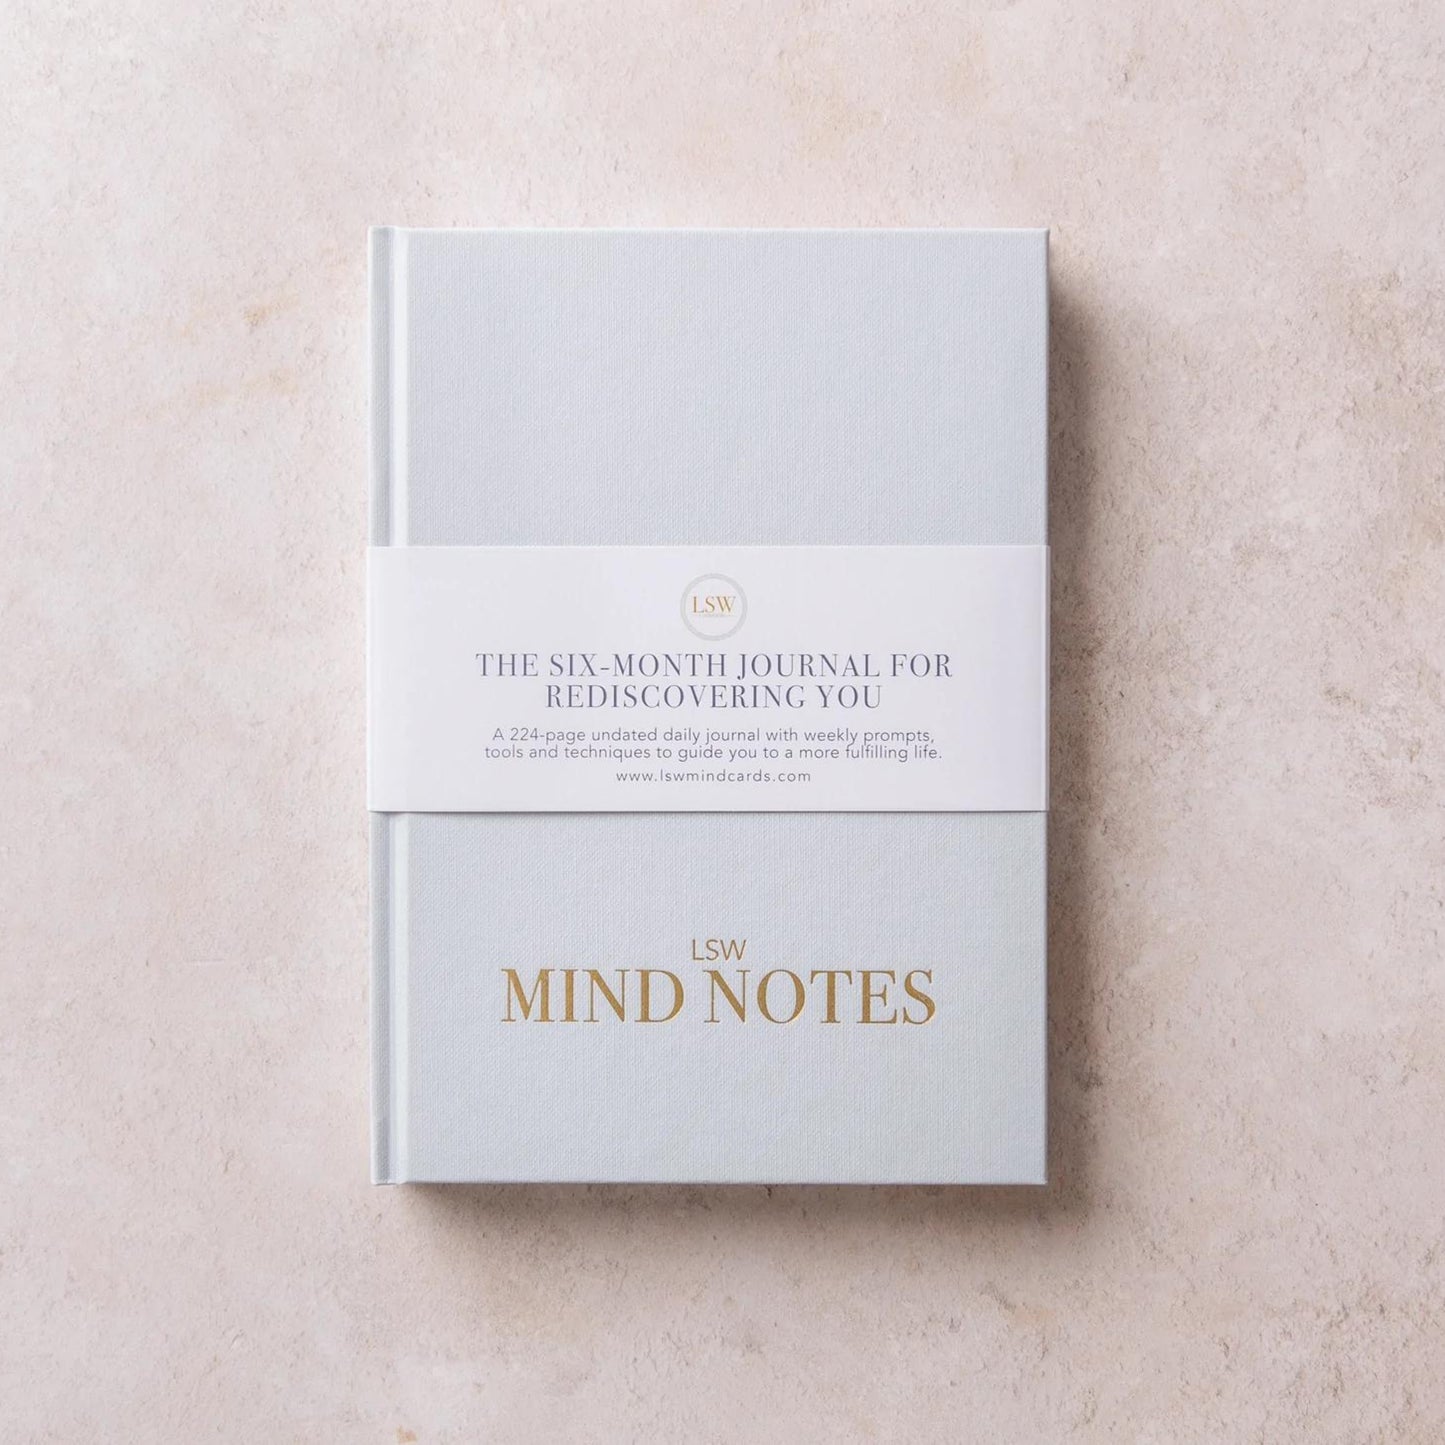 Mind notes by LSW London